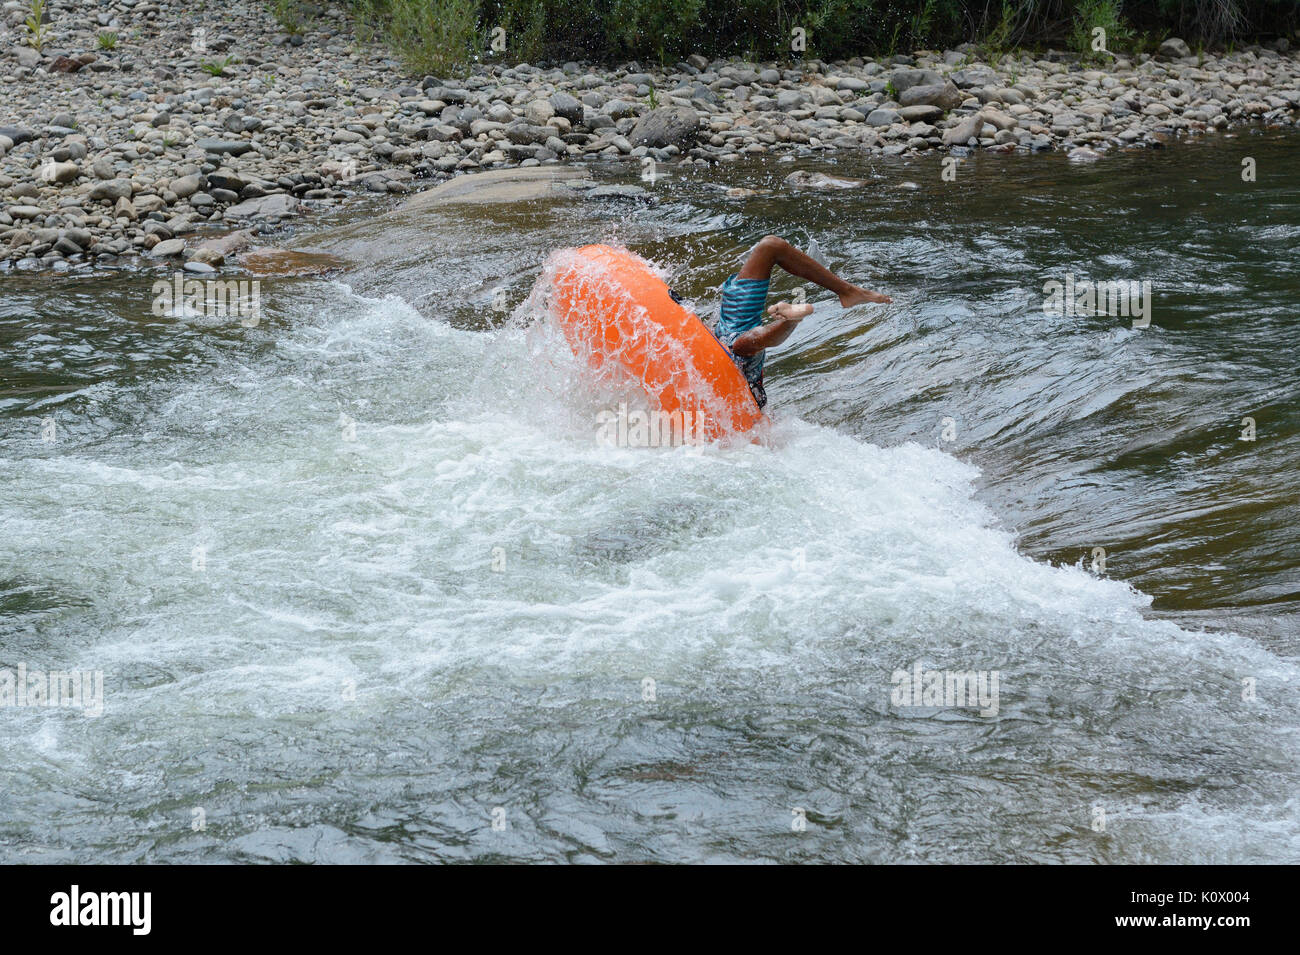 Inner tube float wipe out on white water rapid at Clear Creek White Water Park in Golden, Colorado Stock Photo